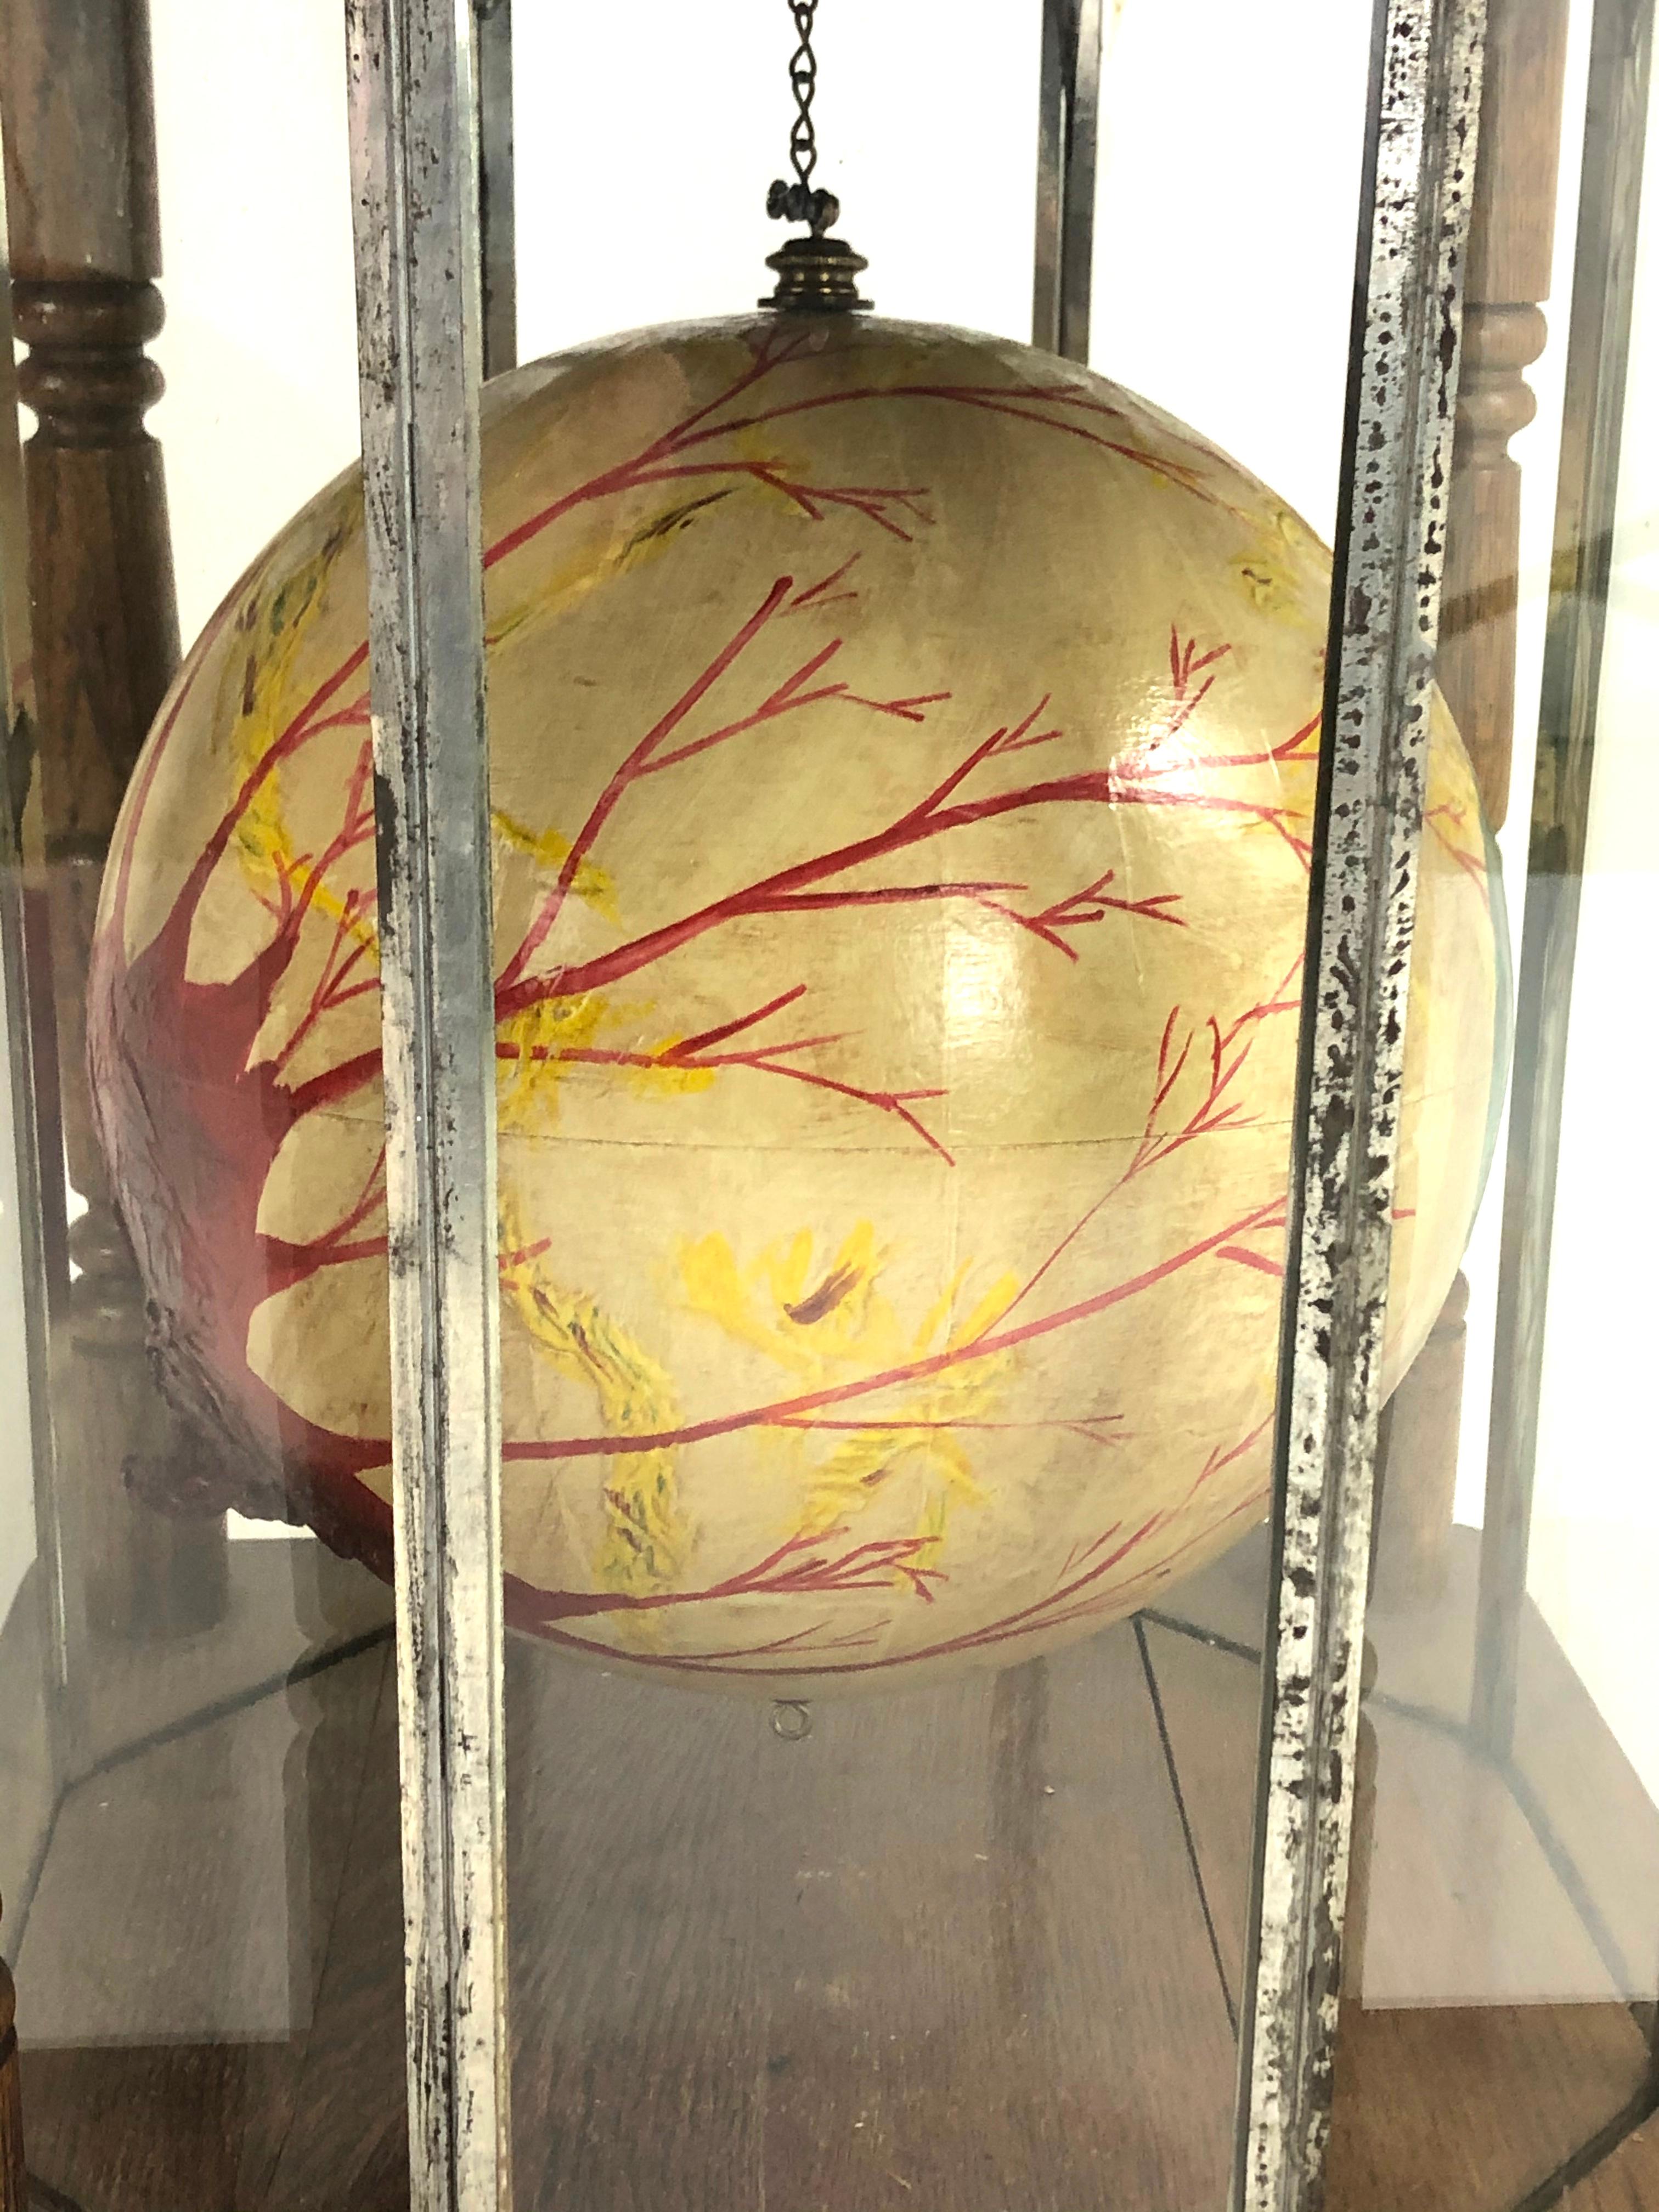 Giant Antique Ophthalmologist's Model of an Eye in Its Original Case 3